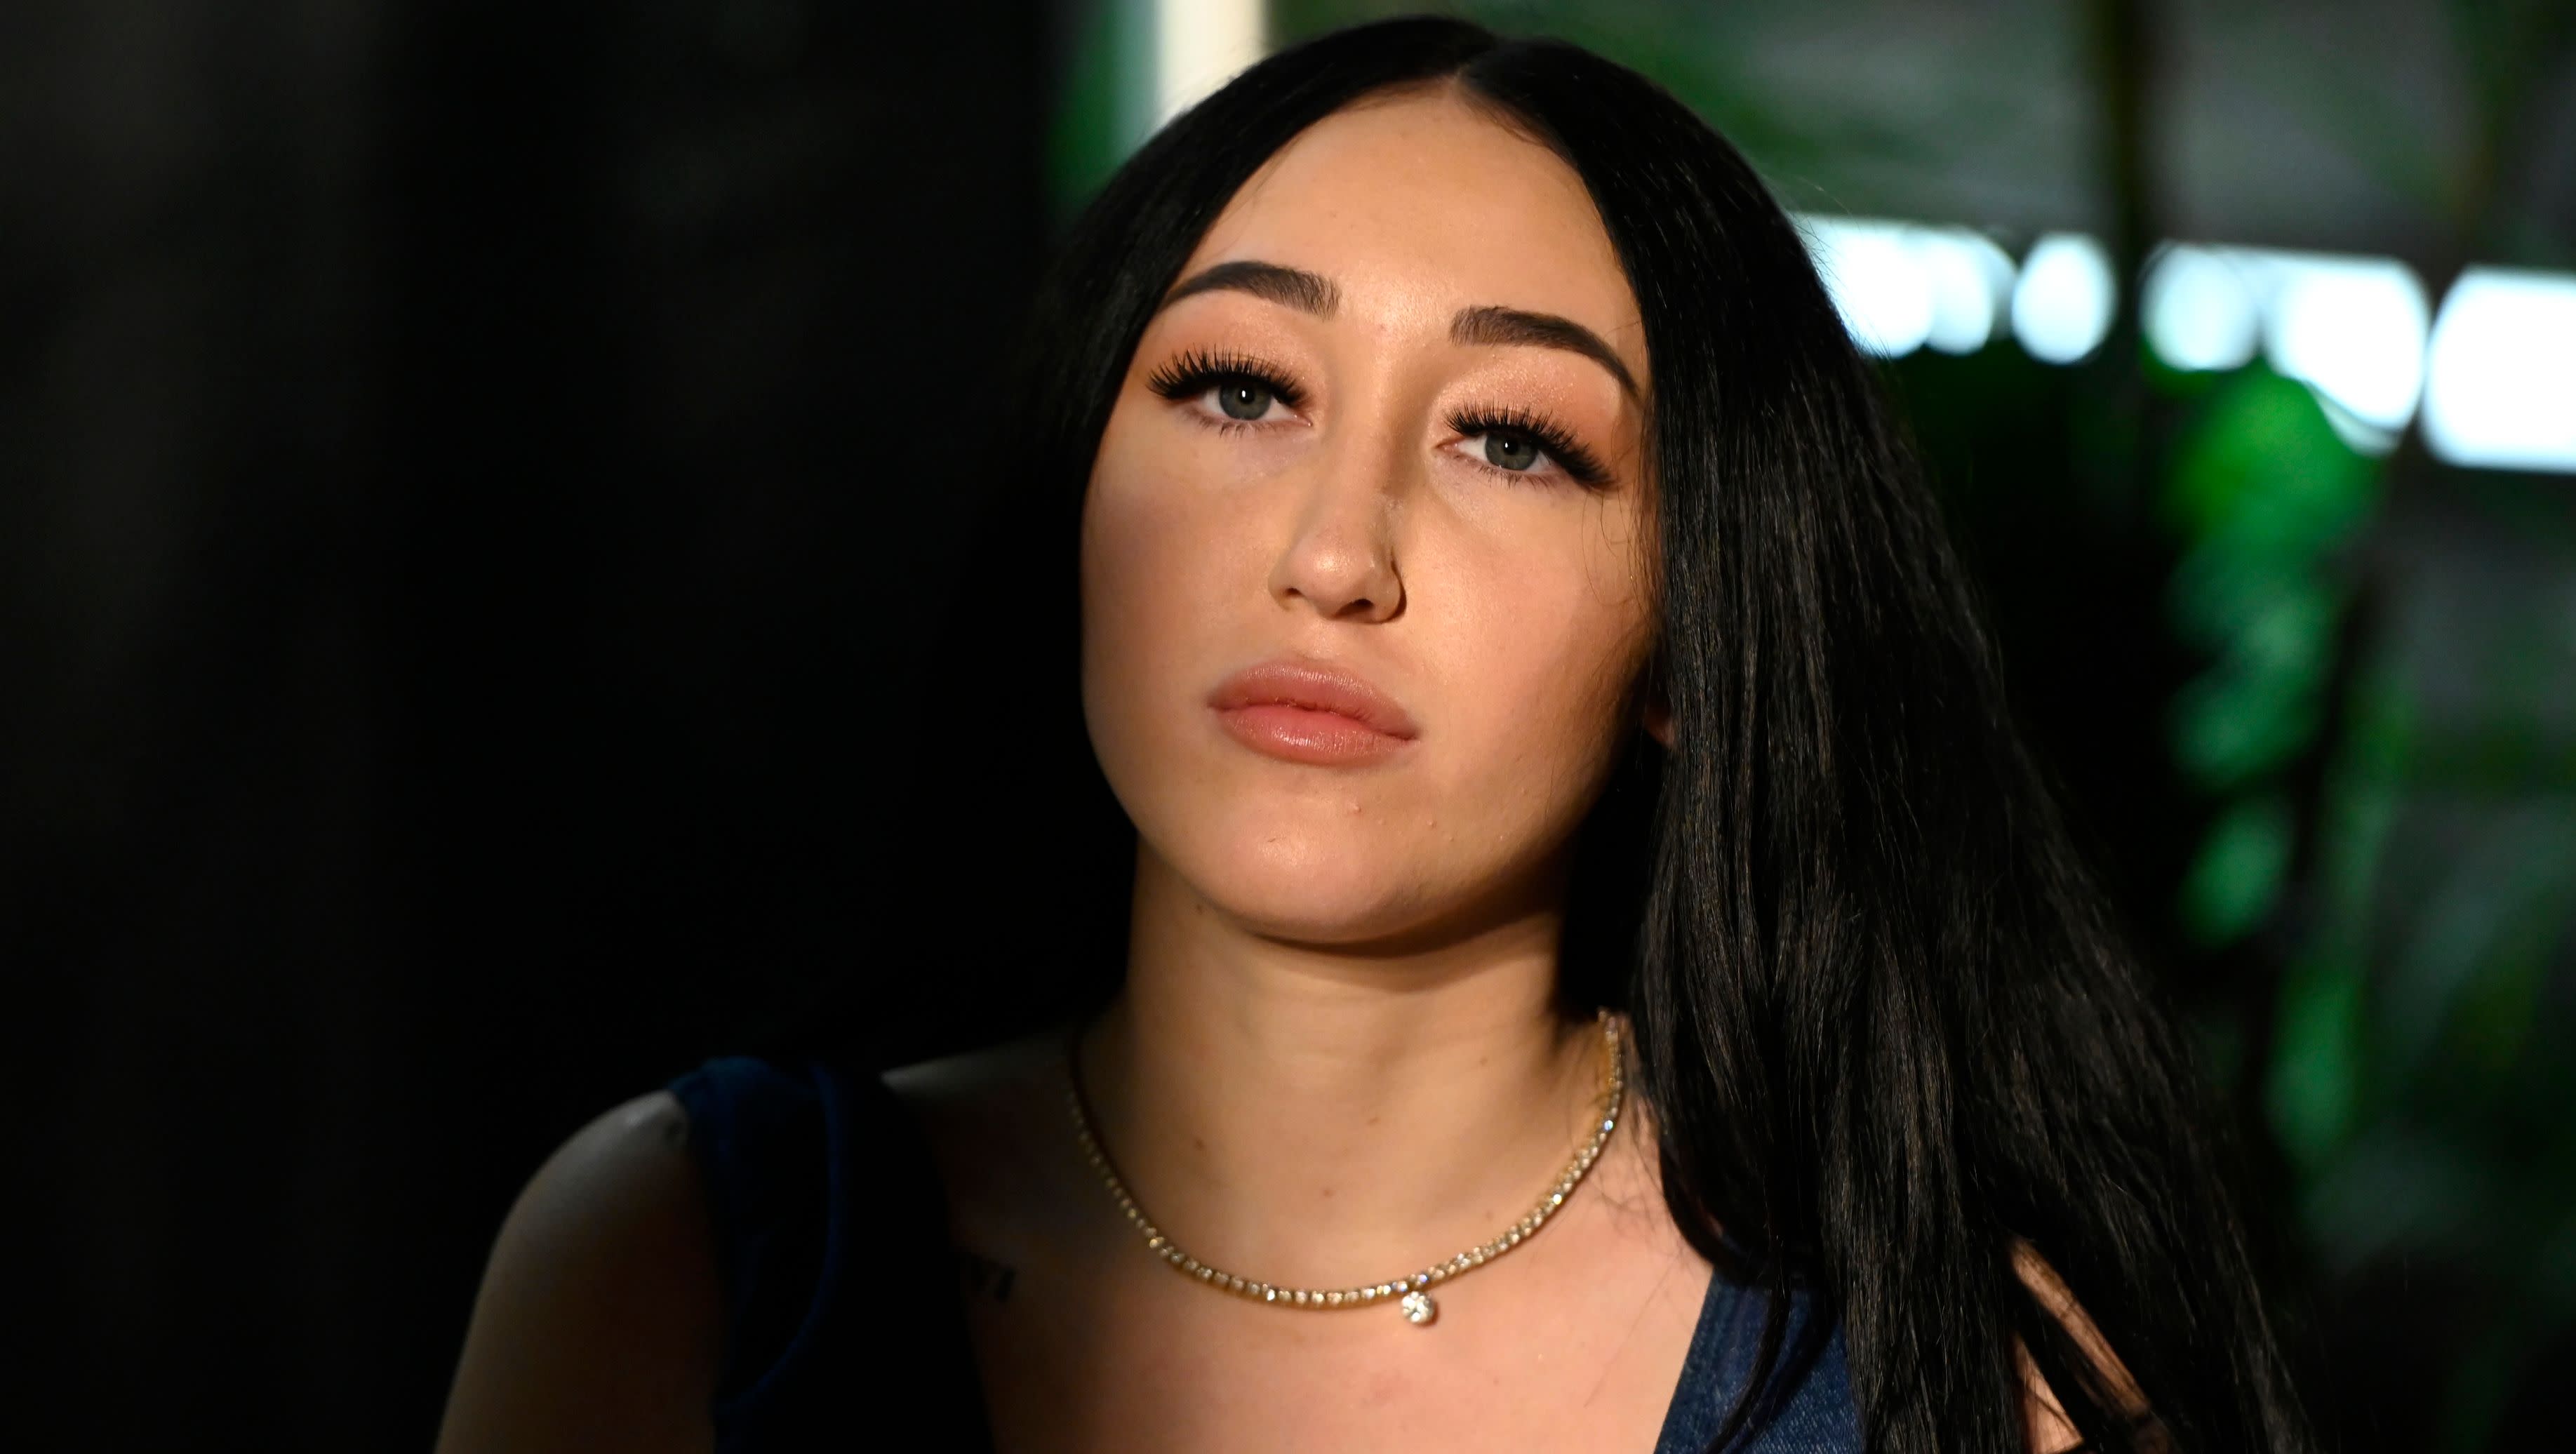 Noah Cyrus Shares Bathtub Pic, Says Her 'Body Is A Cage'